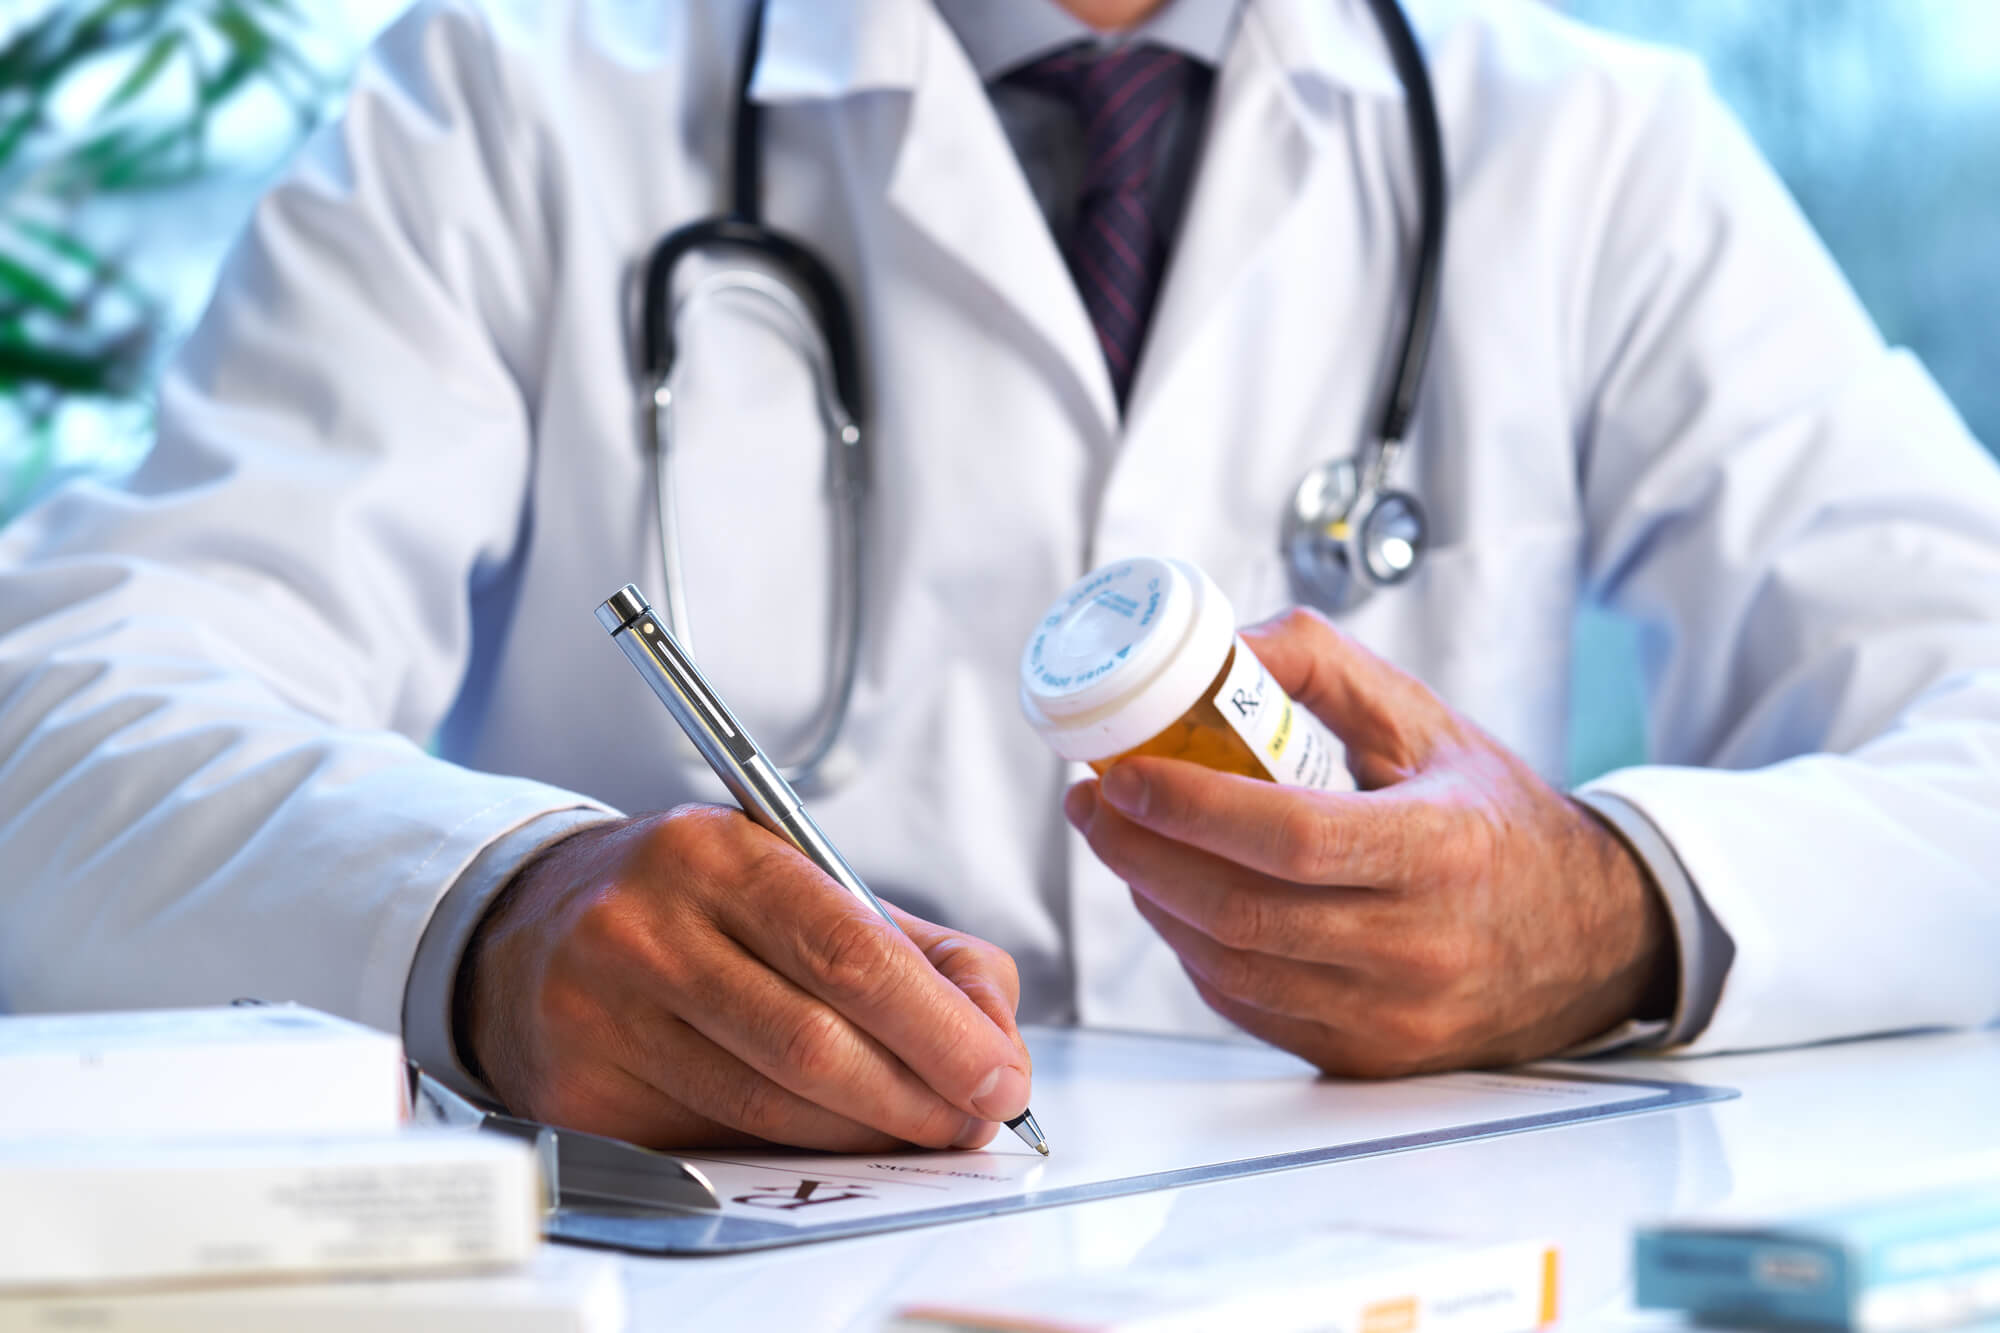 A doctor with a stethoscope around his neck writes a prescription, possibly unaware of the connection between opiates and low testosterone.